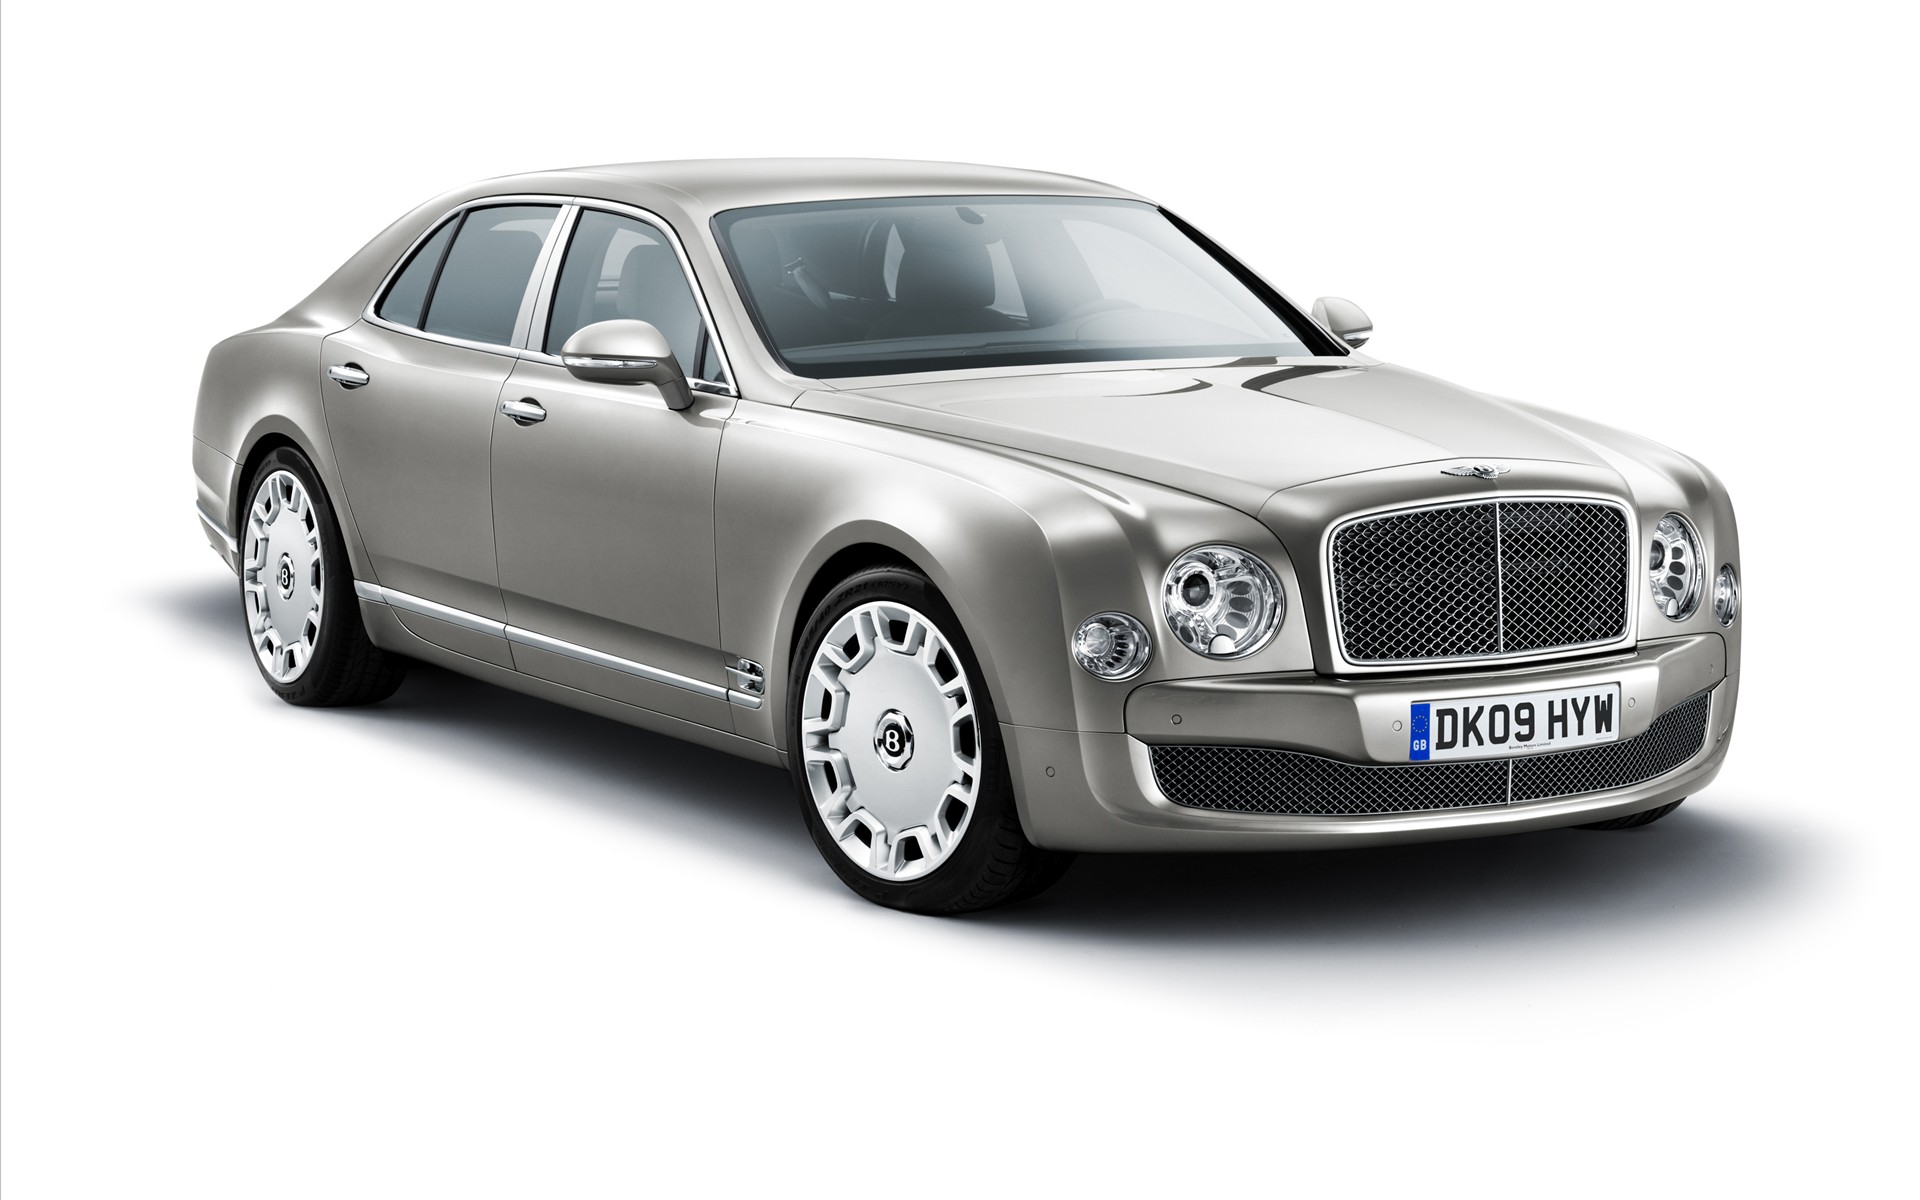 Download High quality DK09 HYW front Bentley wallpaper / 1920x1200